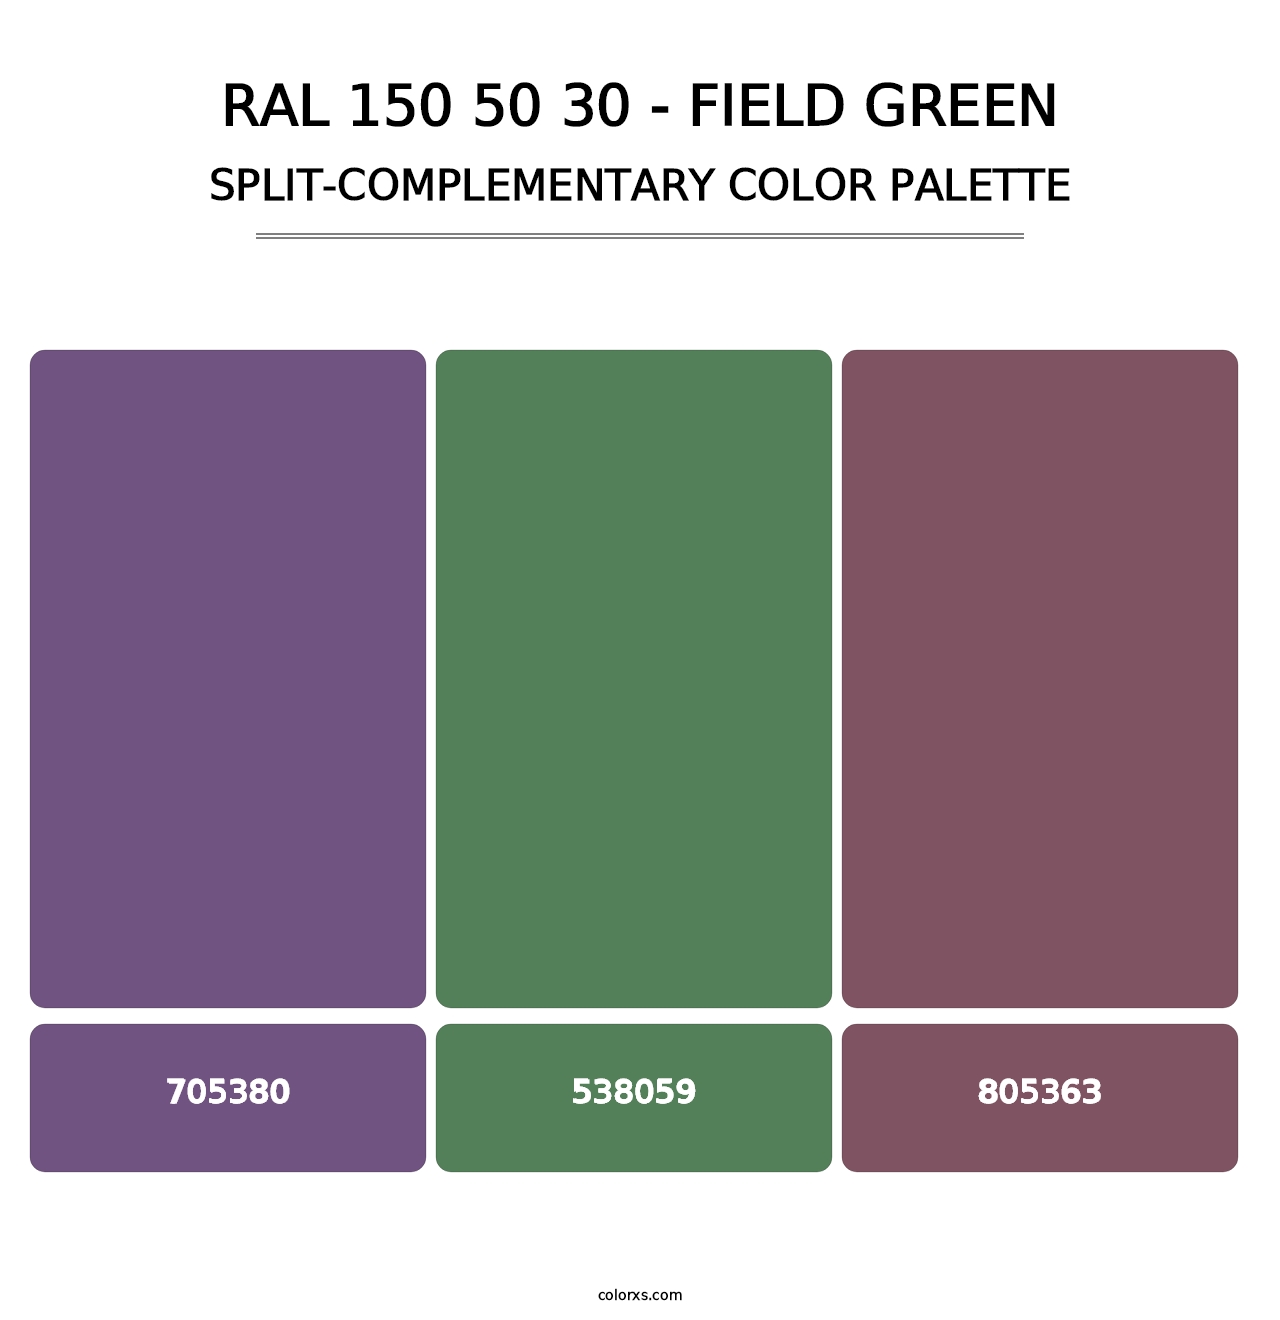 RAL 150 50 30 - Field Green - Split-Complementary Color Palette